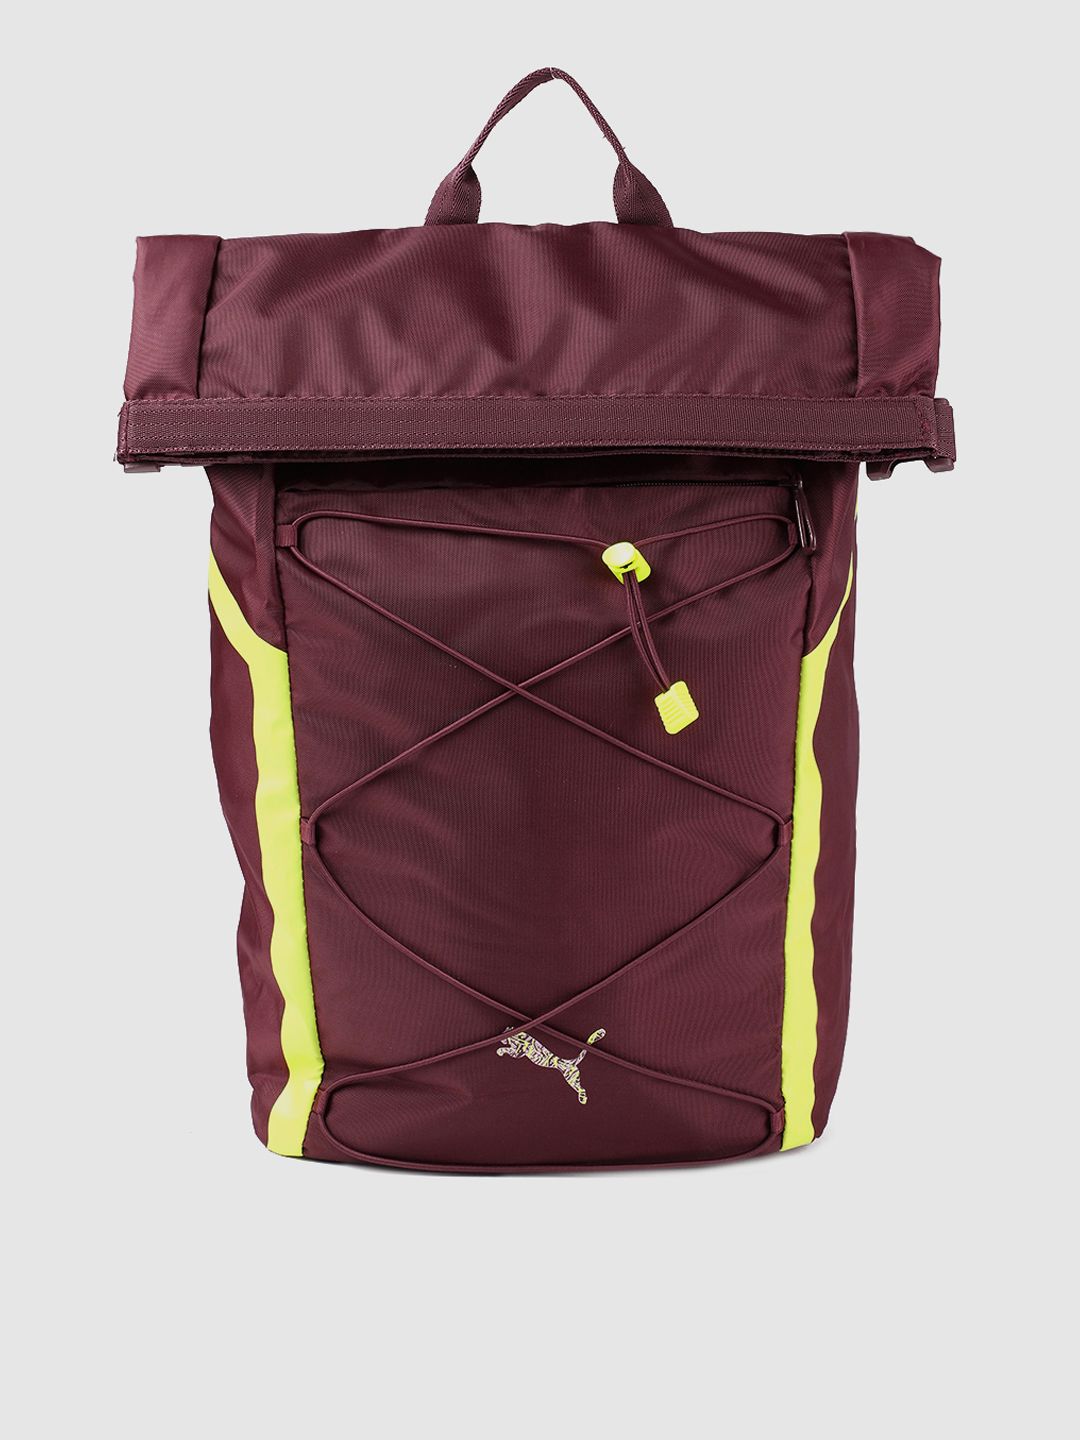 Puma Women Mauve Solid Backpack Price in India